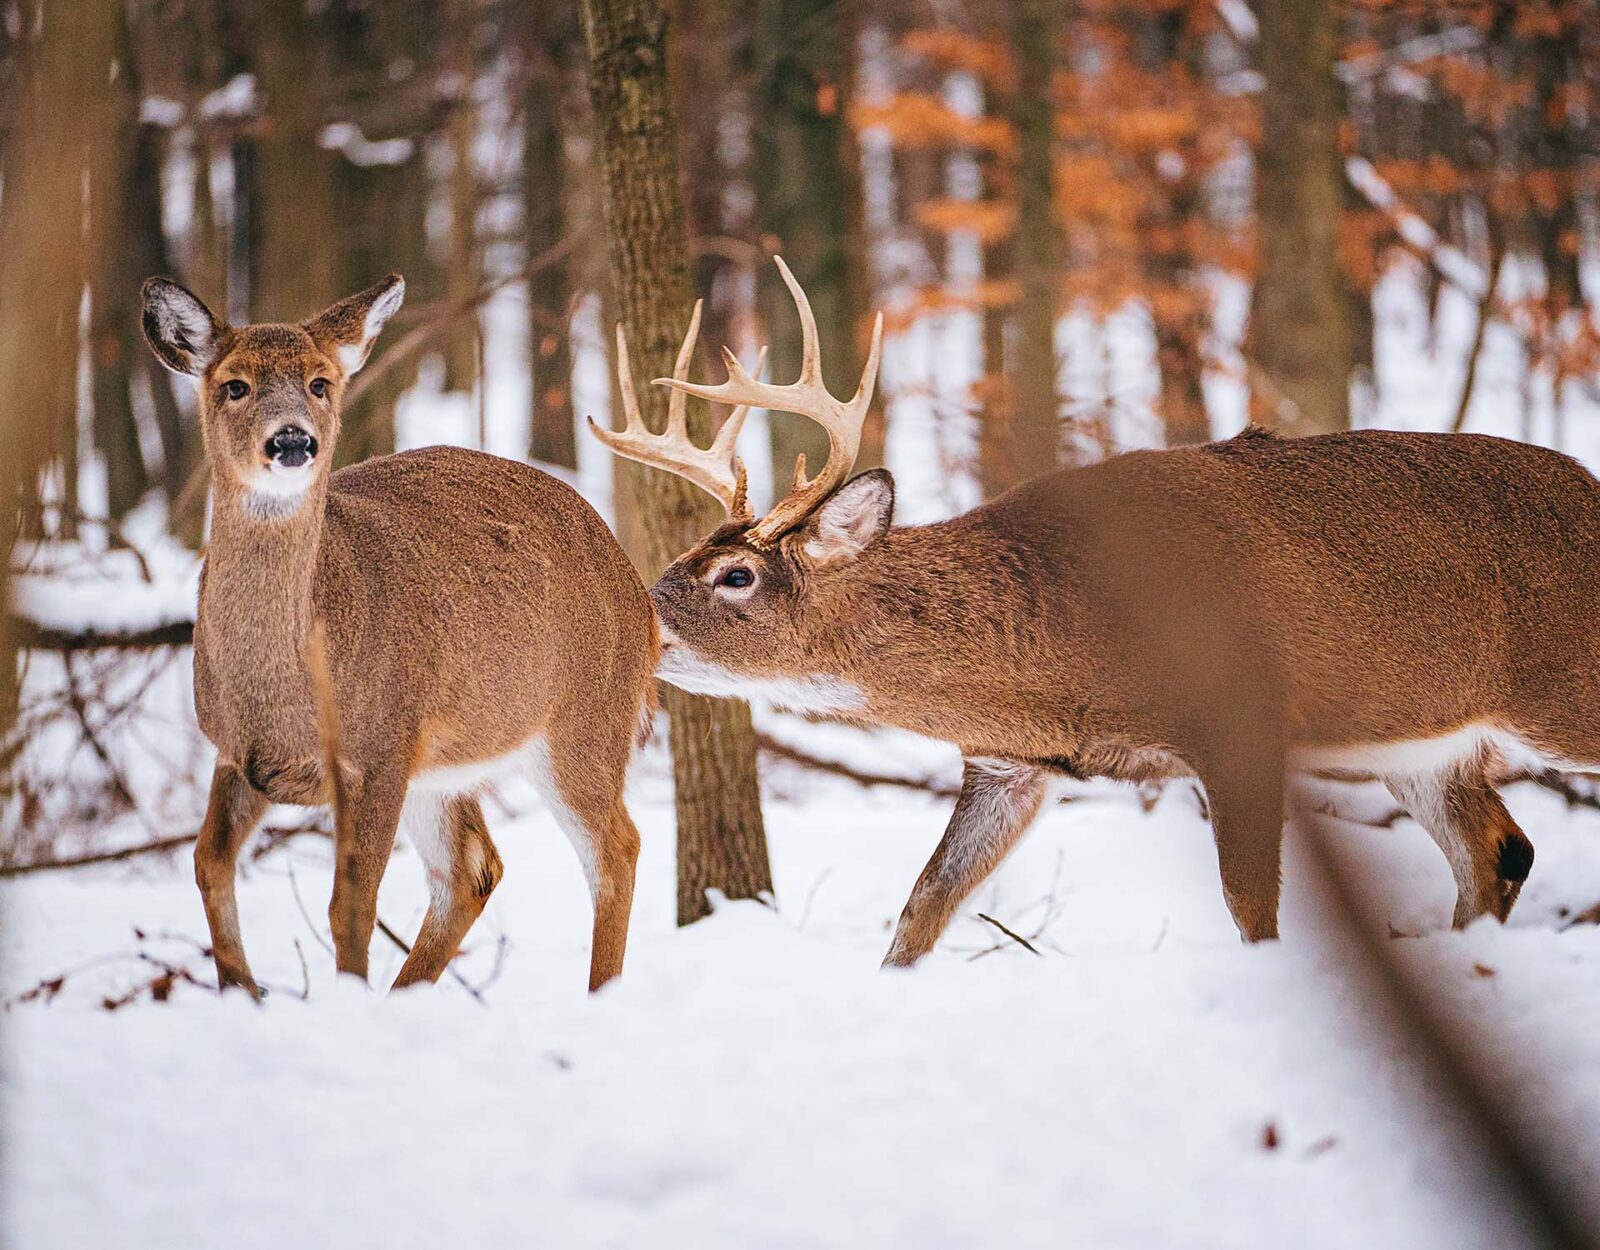 A whitetail buck sniffs a whitetail doe in the snowy woods. 